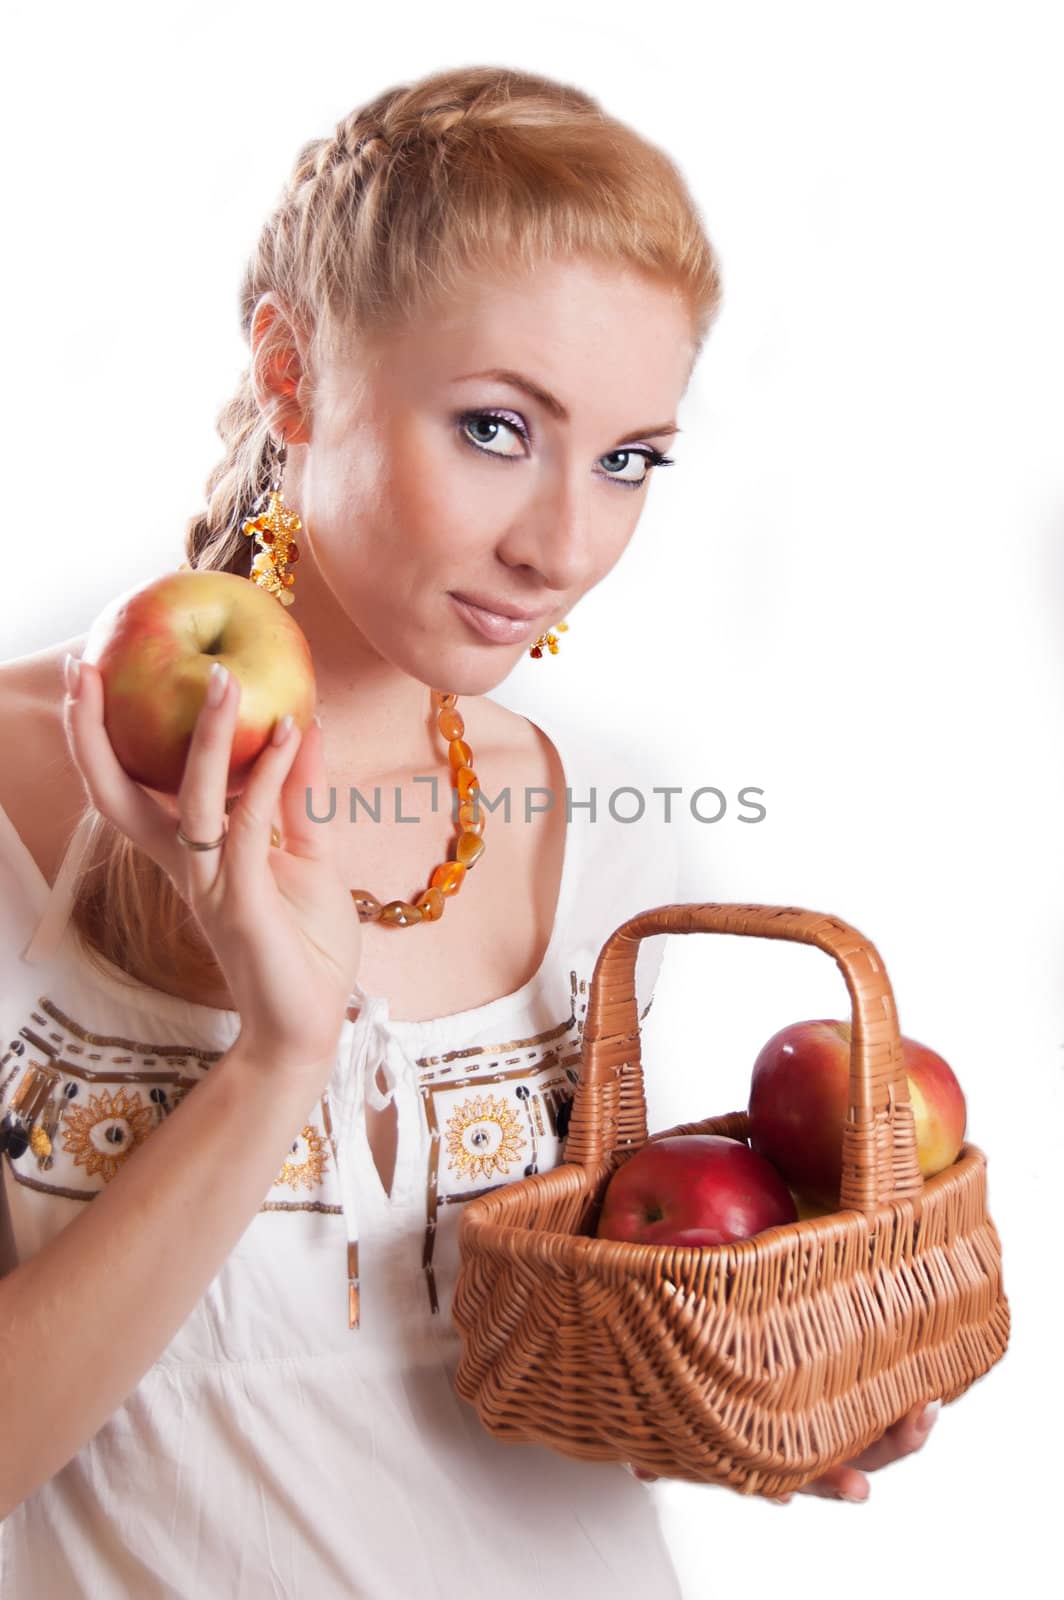 Woman with basket of apples by Angel_a